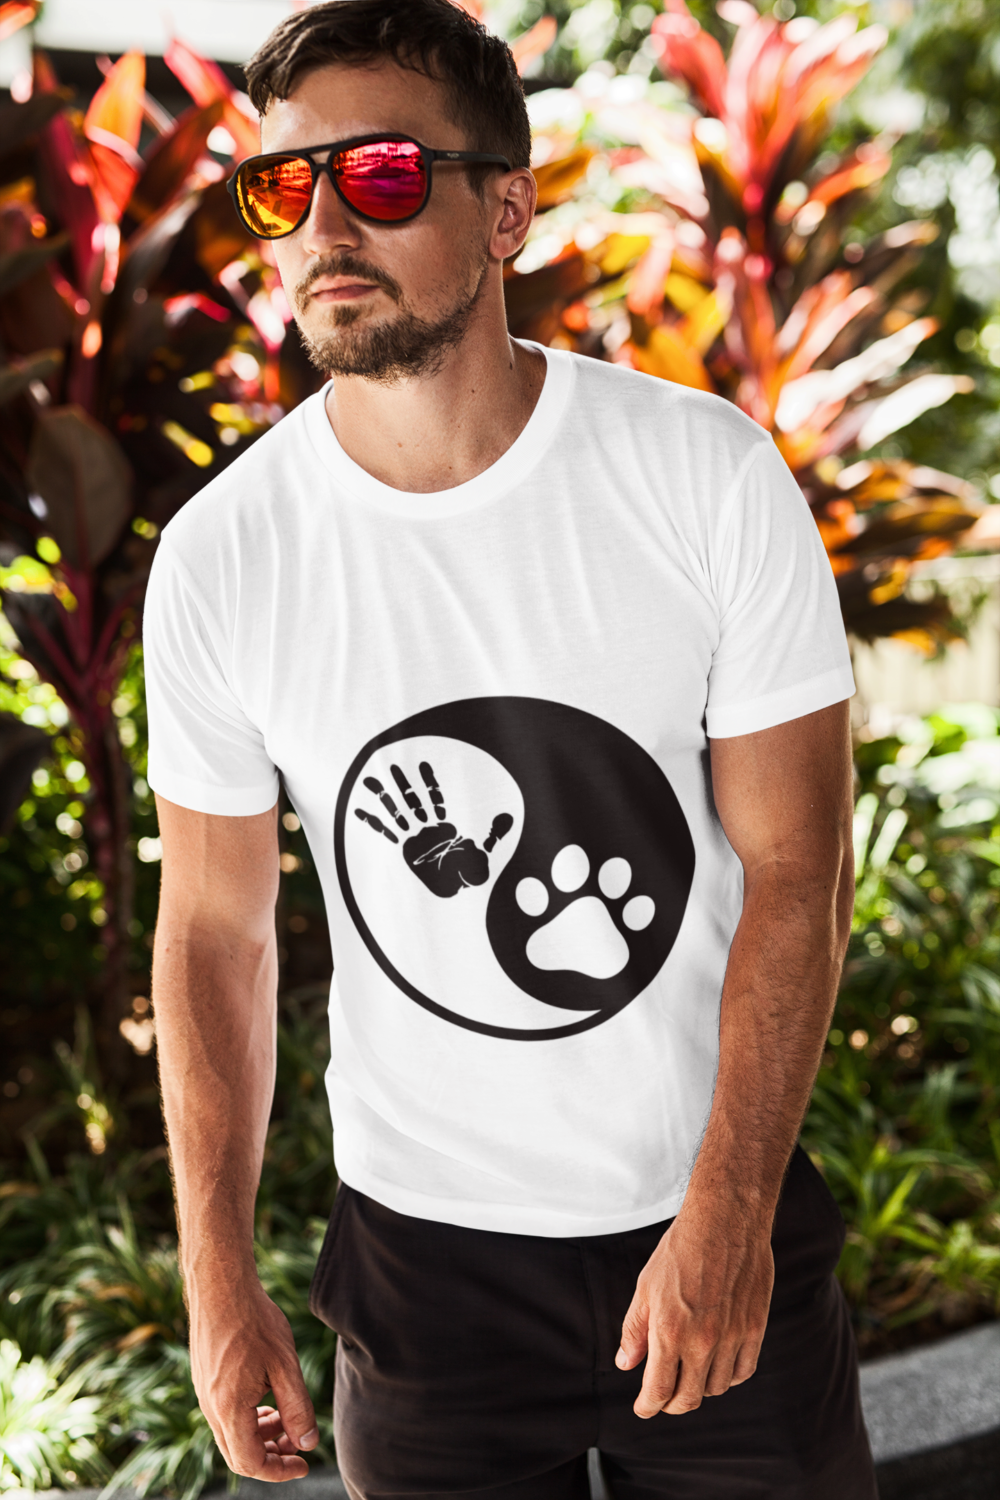 t shirt mockup featuring a bearded man with sunglasses posing in front of some plants 2248 el1 2